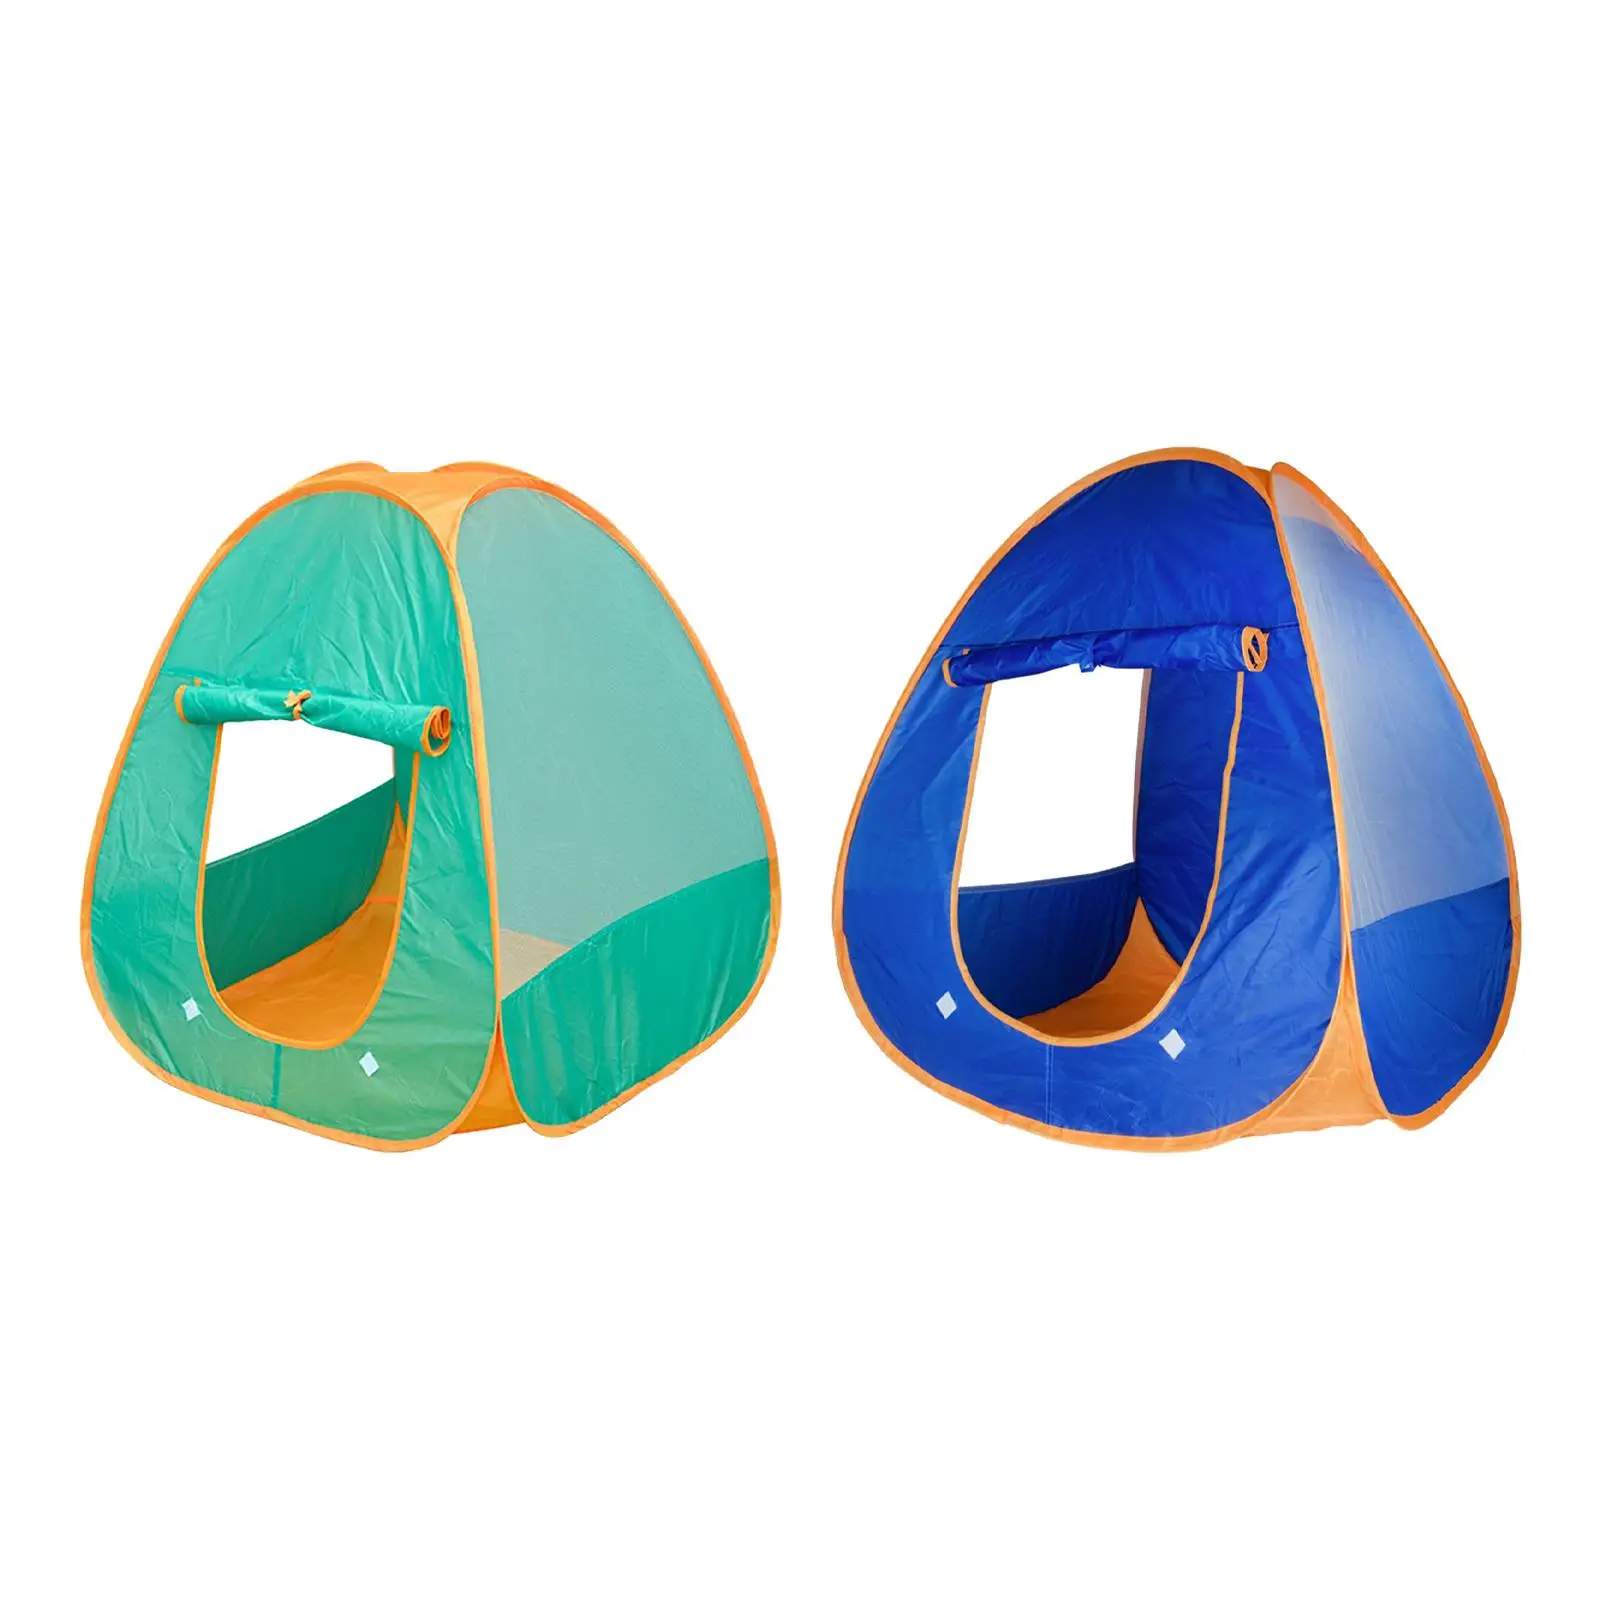 Kids Play Tent Foldable Portable for Girls Boys Child Room Decoration for Game Nursery Room Indoor Outdoor Party Camping